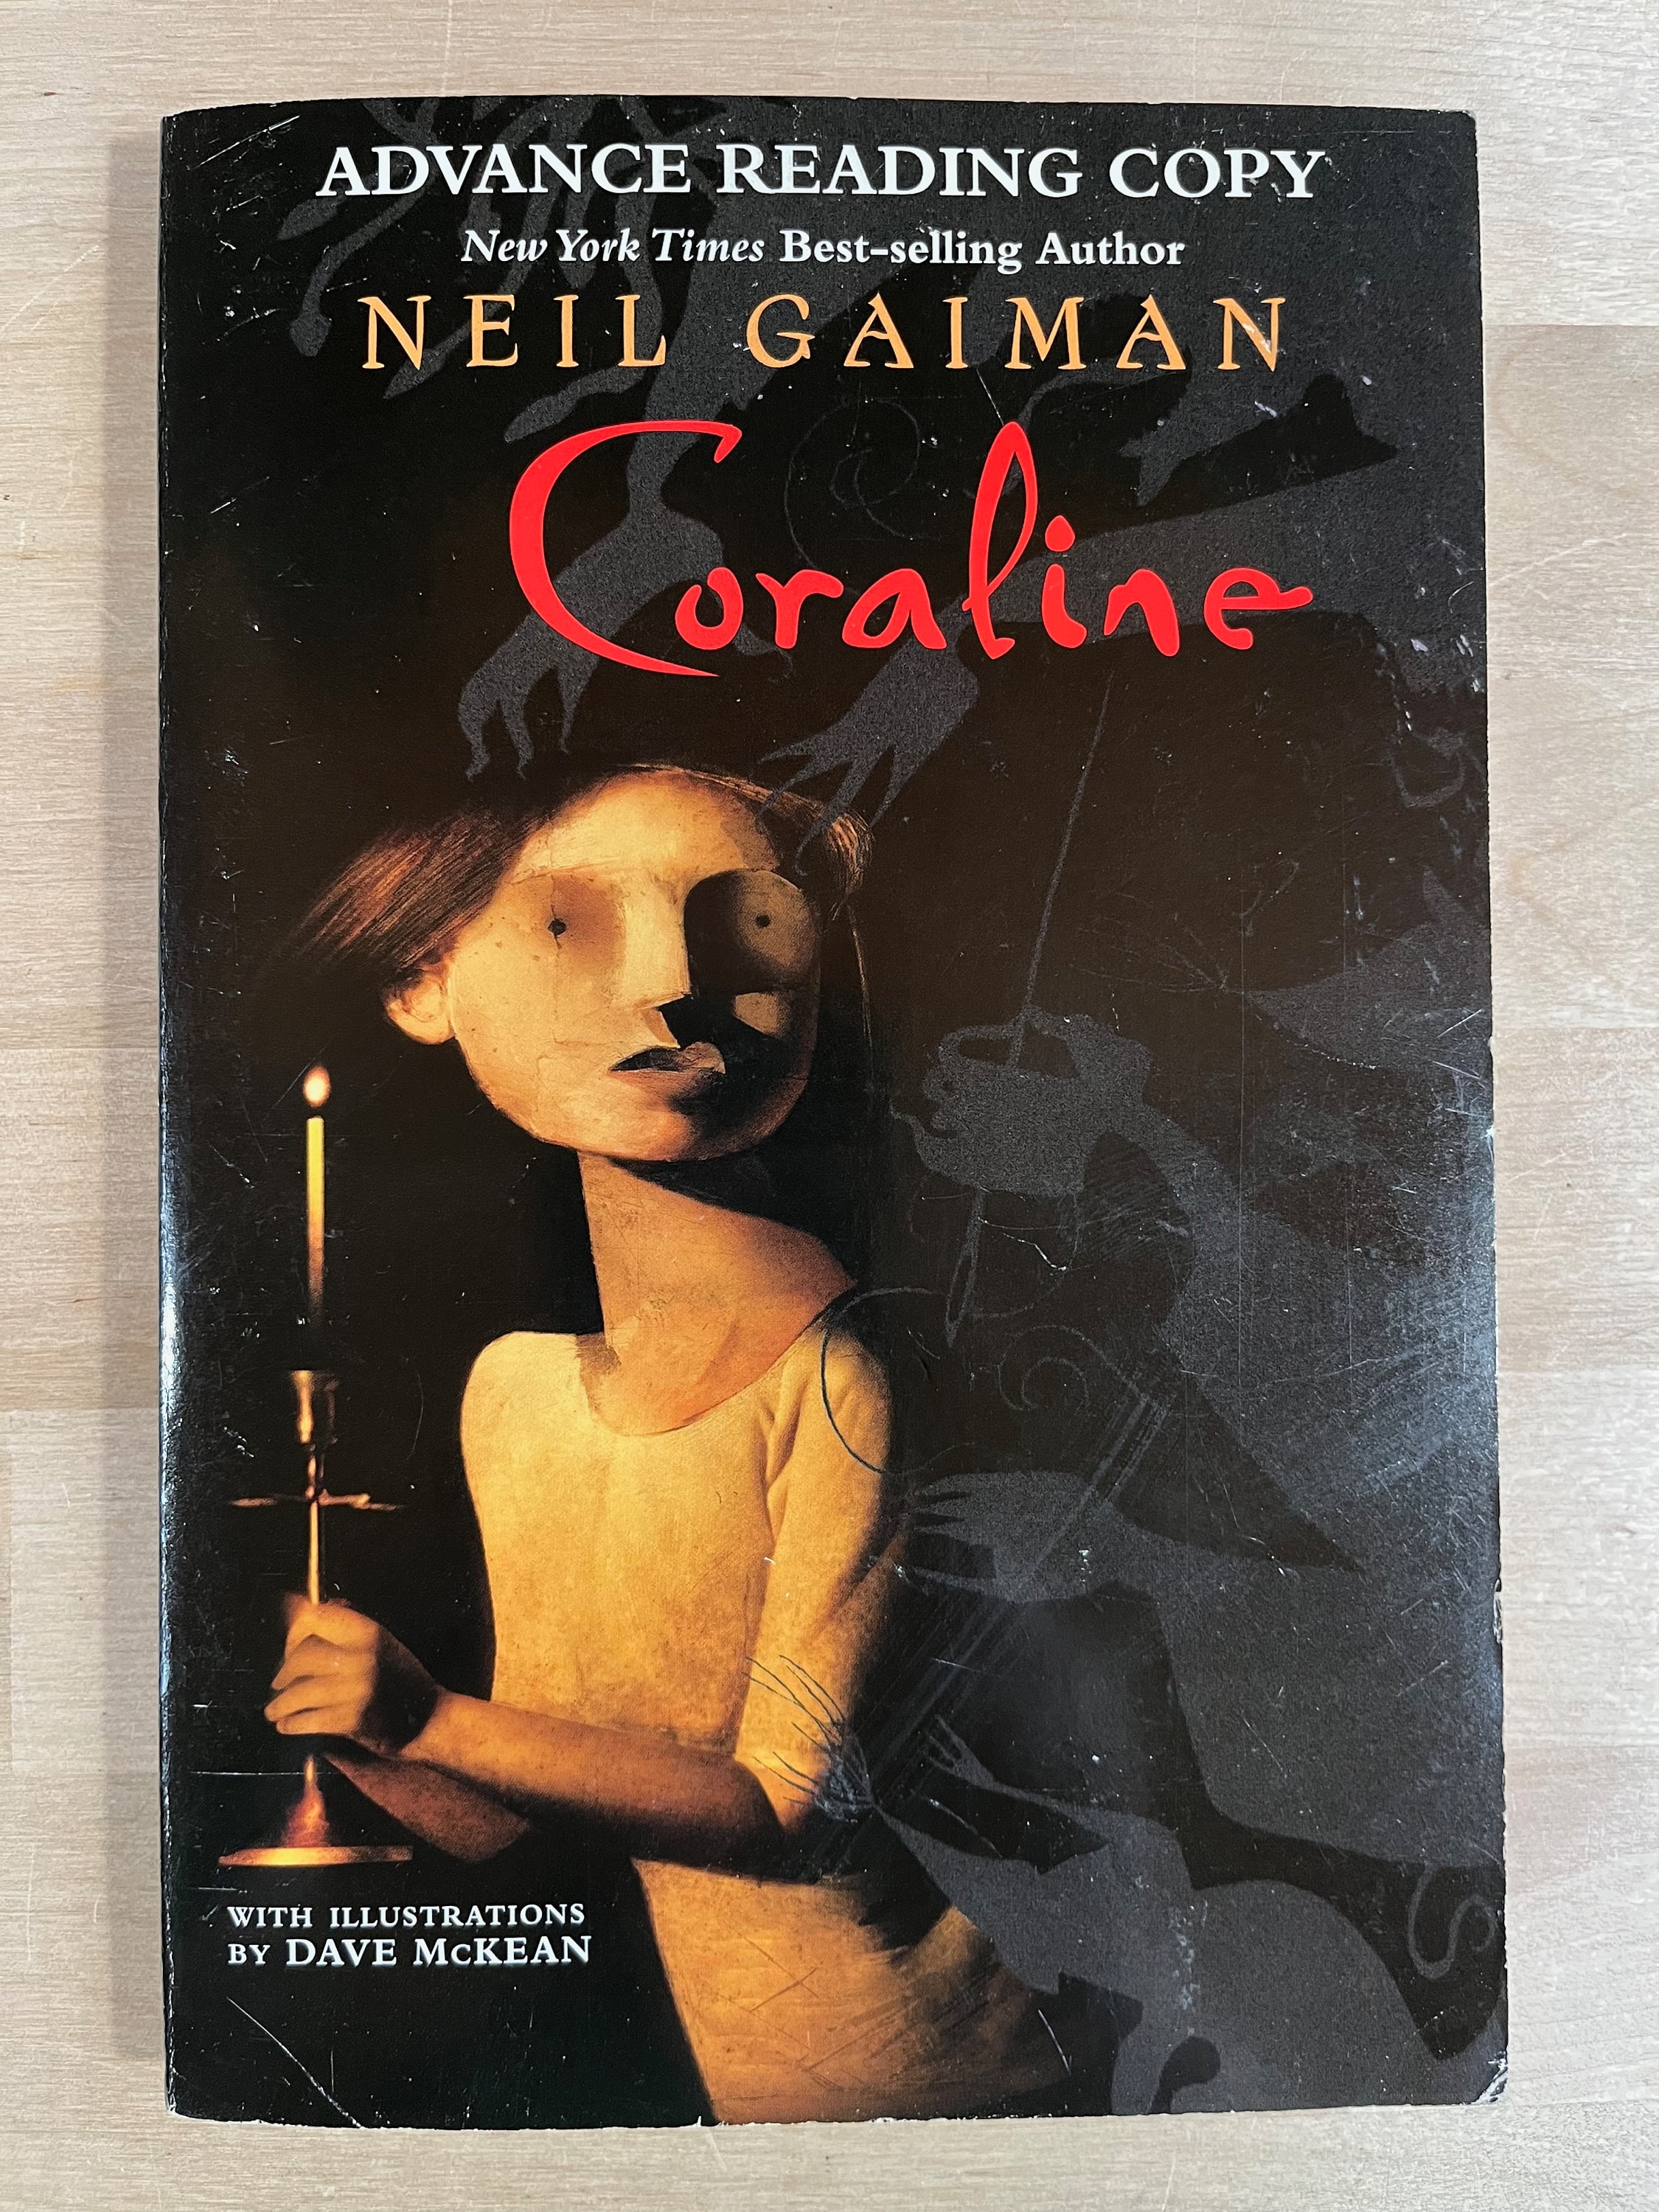 Signed, Coraline by Neil Gaiman, Illustrated by Dave Mckean, Advance  Reading Copy, ARC, Publisher's Proof, Stardust/sandman Author, Rare 